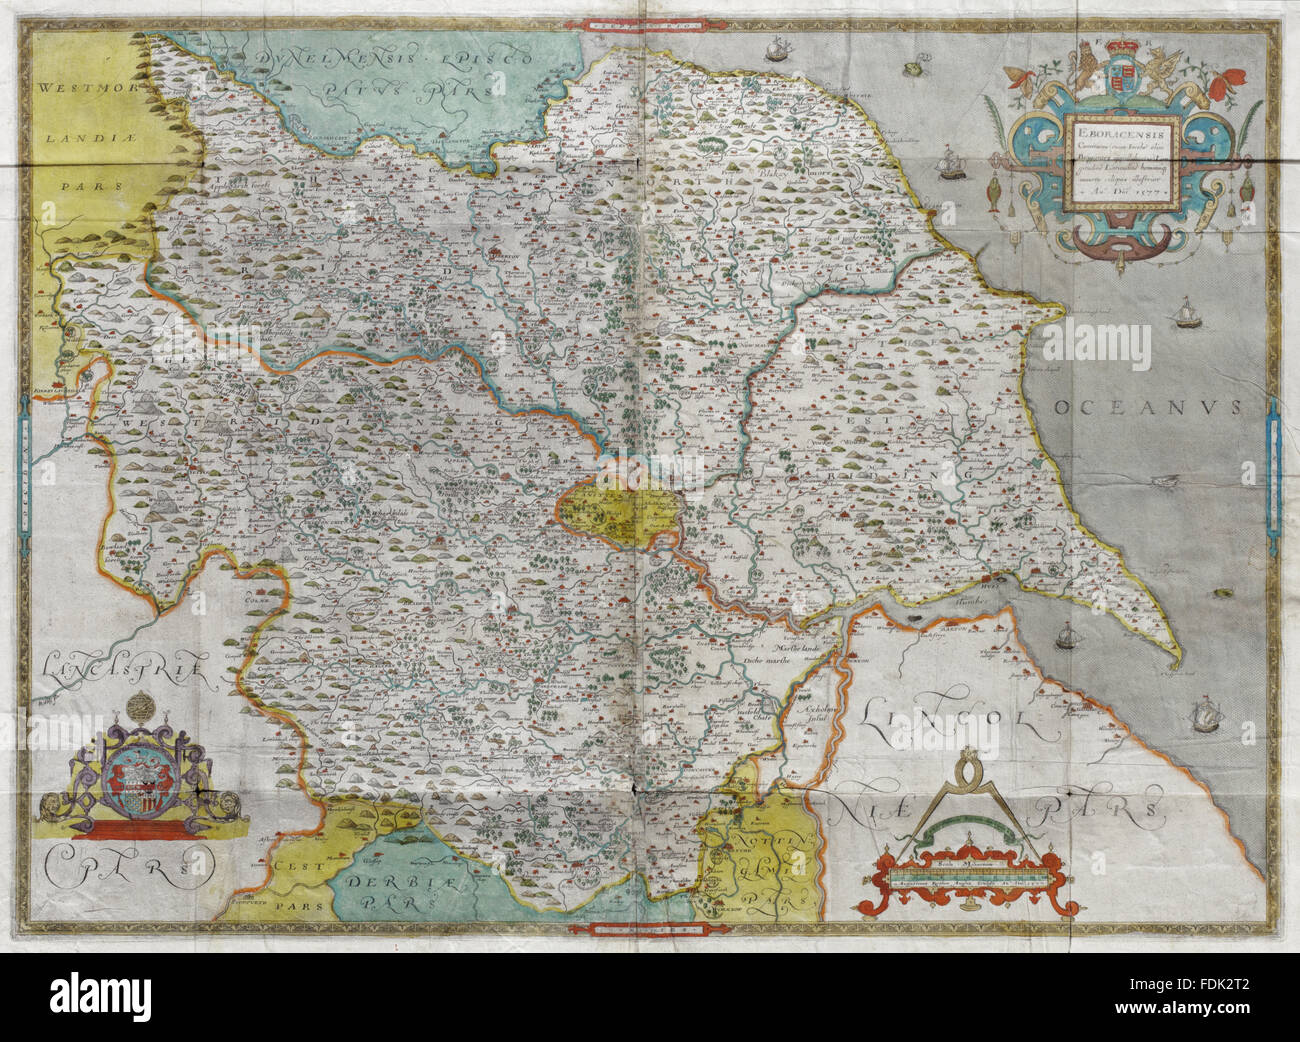 Atlas of the Counties of England and Wales, Christopher Saxon, (London, 1574-79), part of the library collection at Anglesey Abbey, Cambridgeshire. 25.I.19 Stock Photo